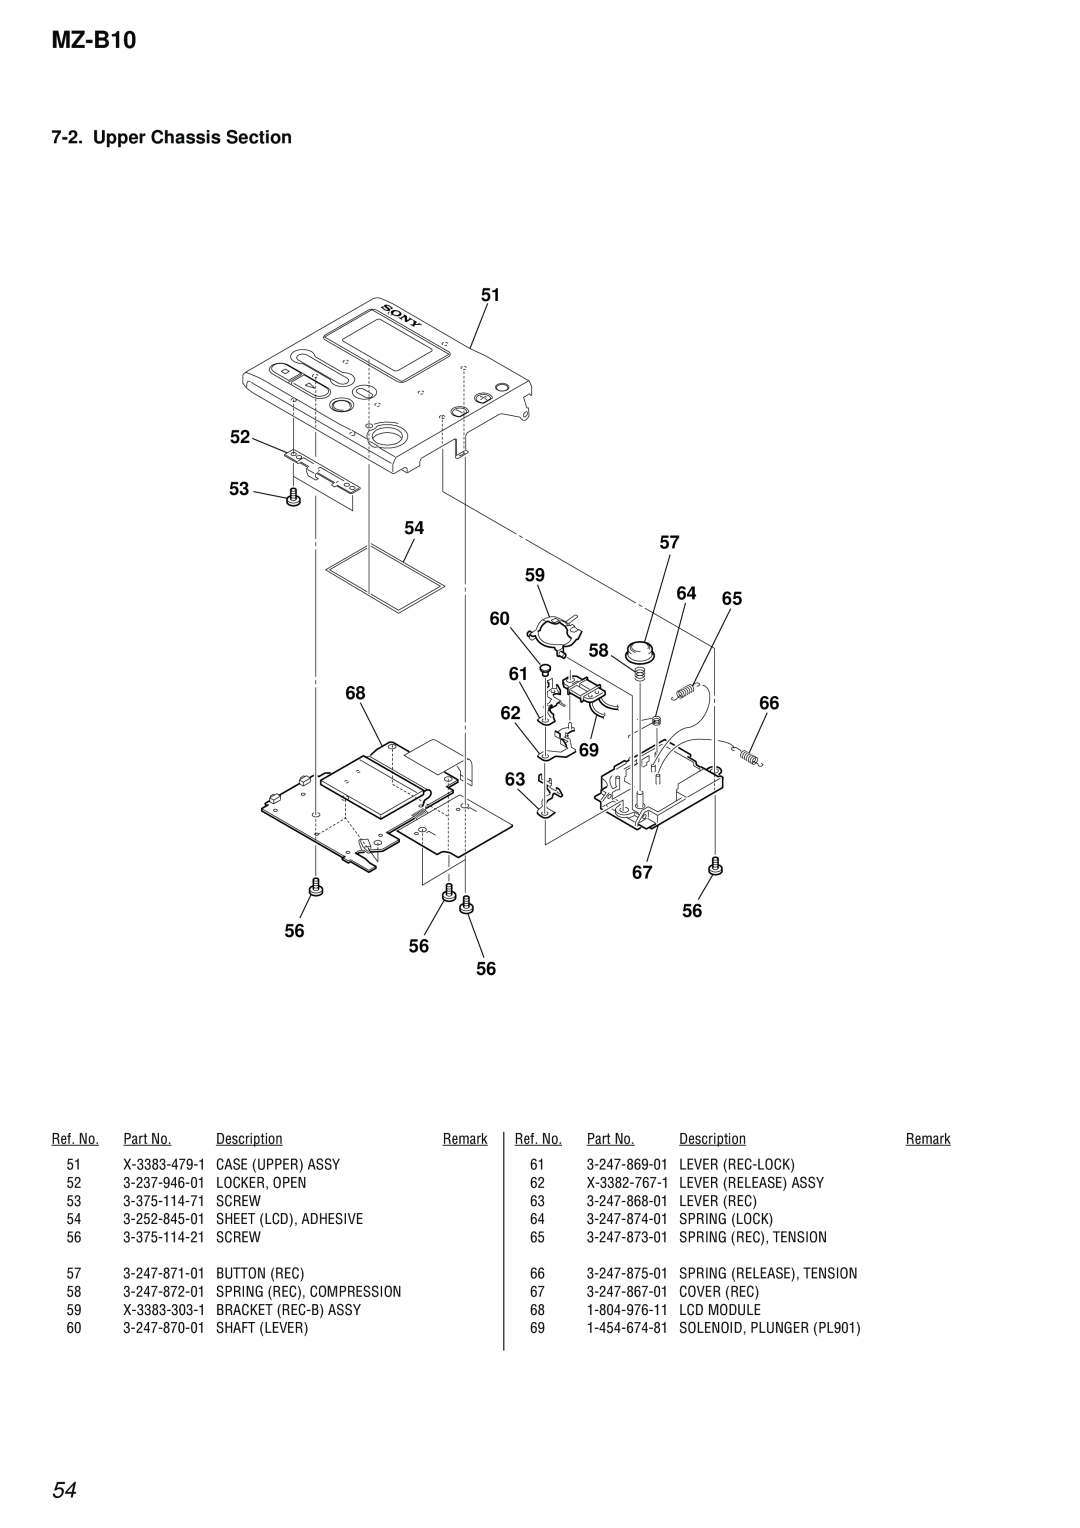 Sony MZ-B10 service manual Upper Chassis Section, 51 54 57 